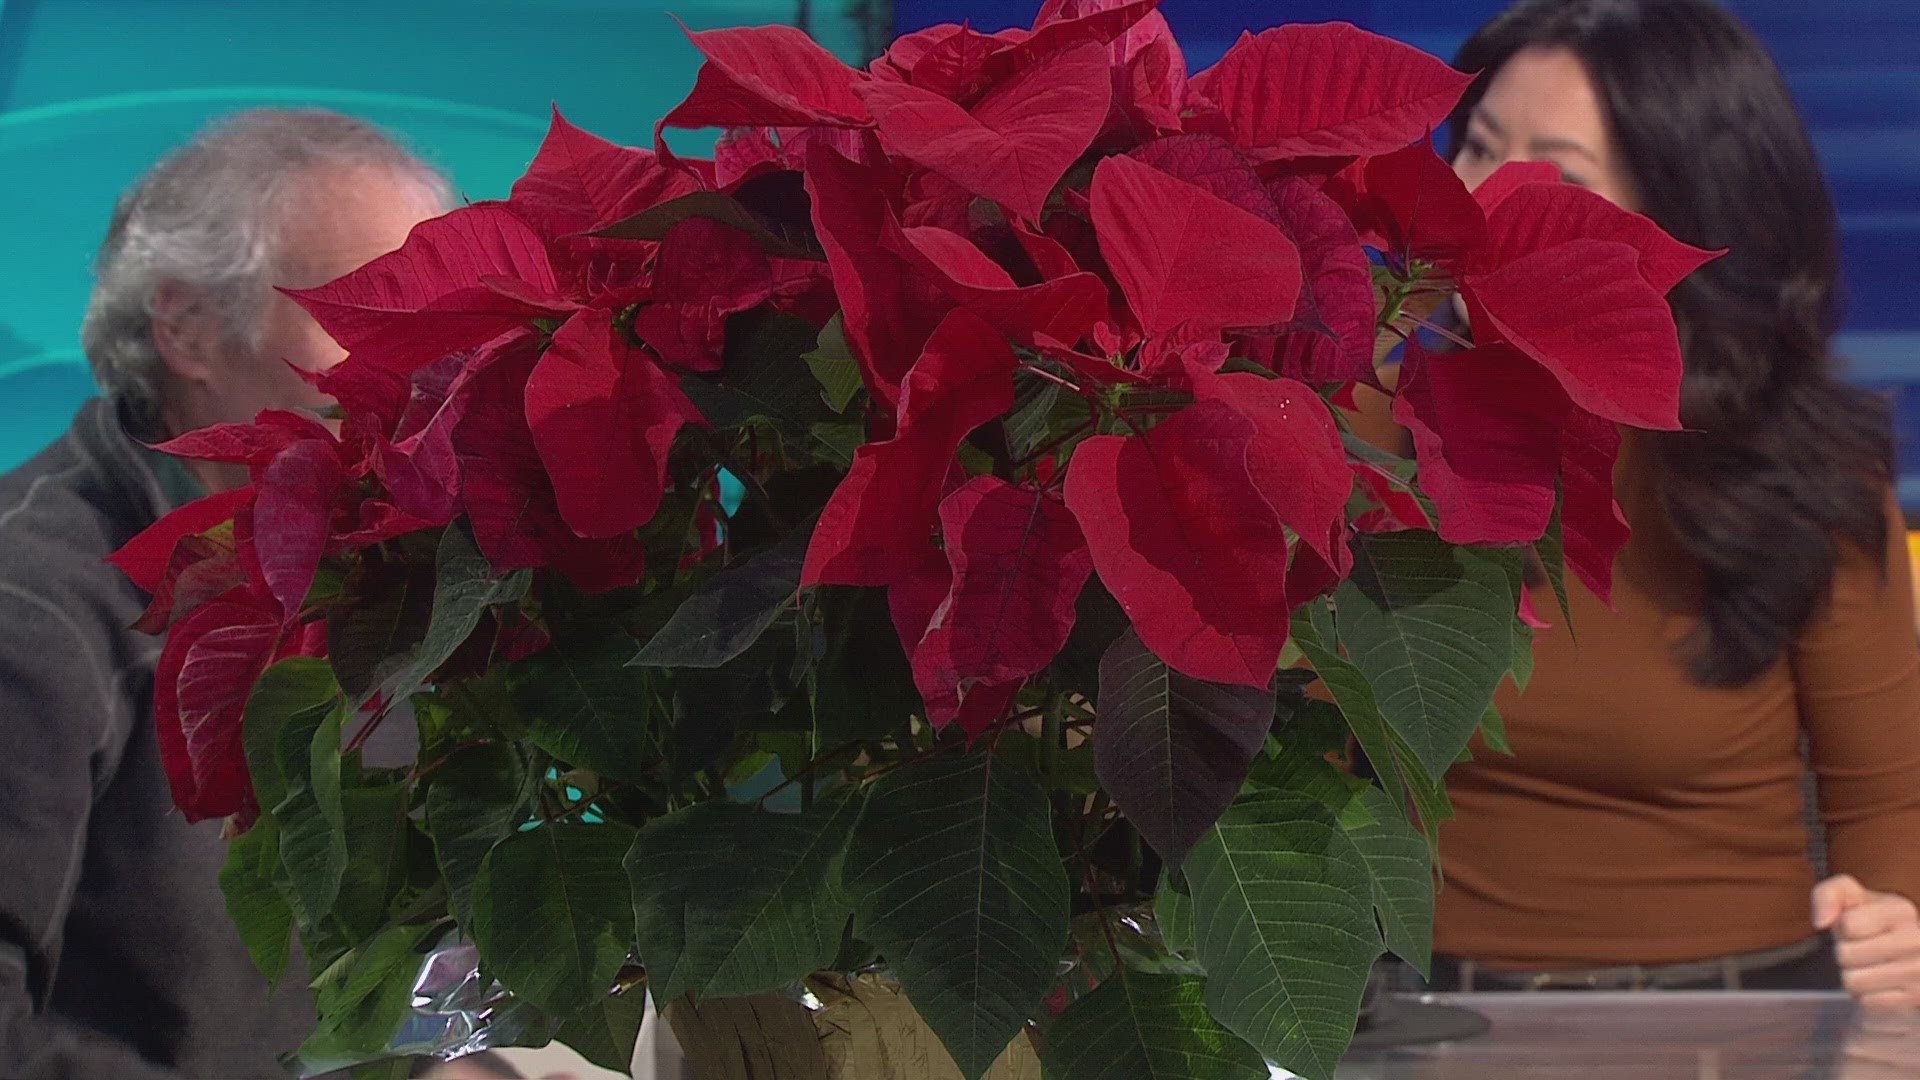 Gardening expert Ciscoe Morris explains how to save your poinsettia plant for next year.